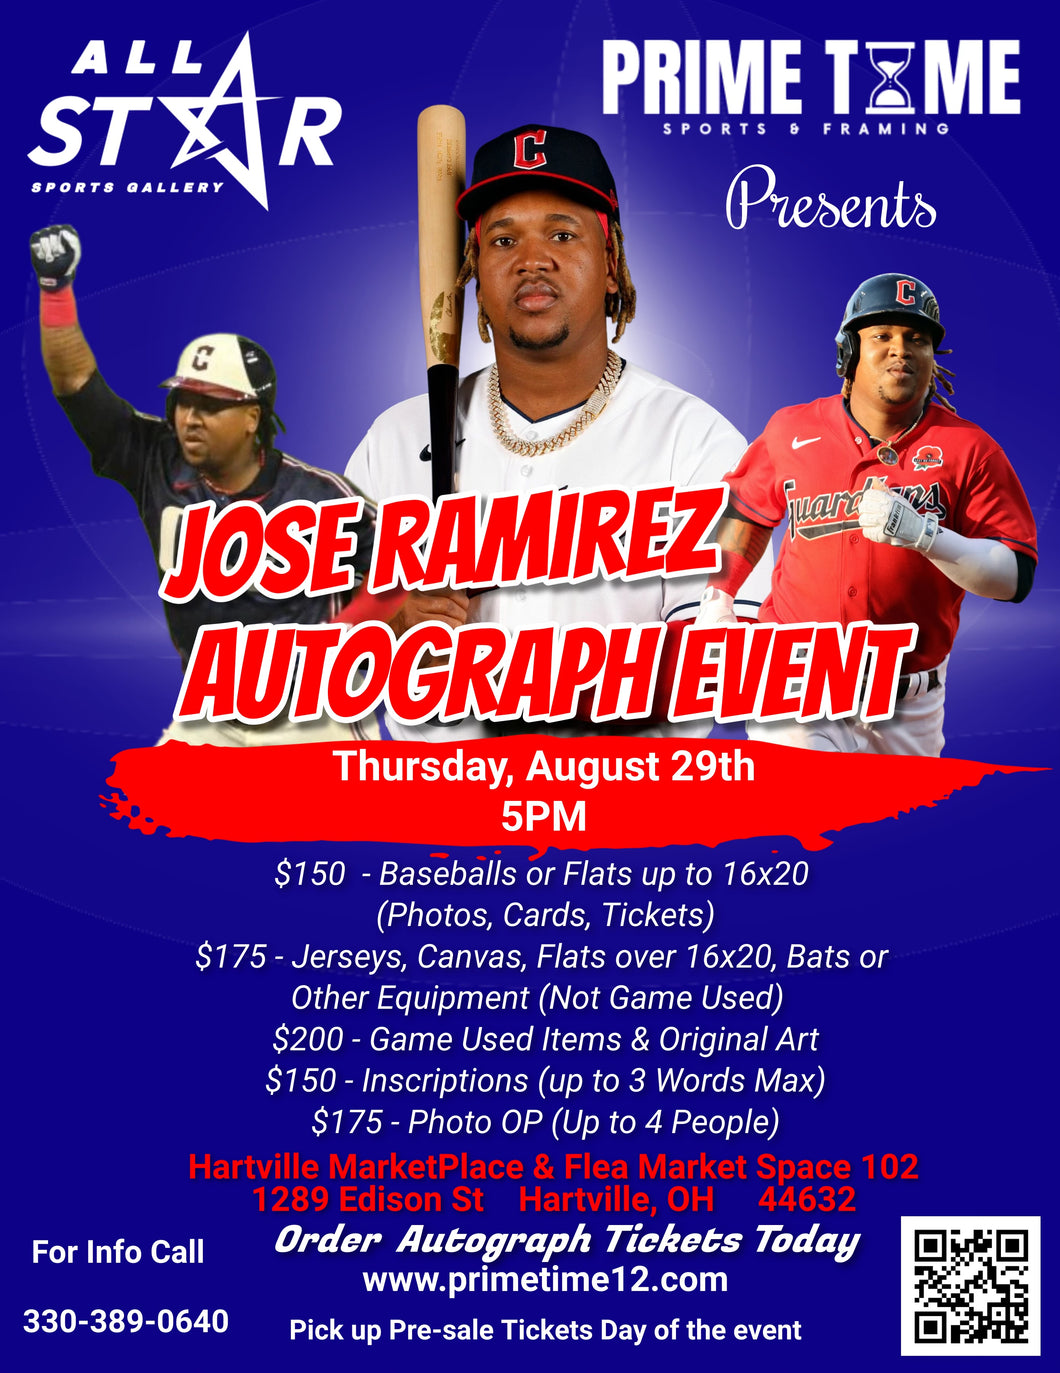 Jose Ramirez Pre-Sale COMBO ticket for autograph signing on any 1 Baseball or Flat item up to 16x20 (Photo, card, magazine, or ticket) and 1 Photo Op (up to 4 people in 1 photo)